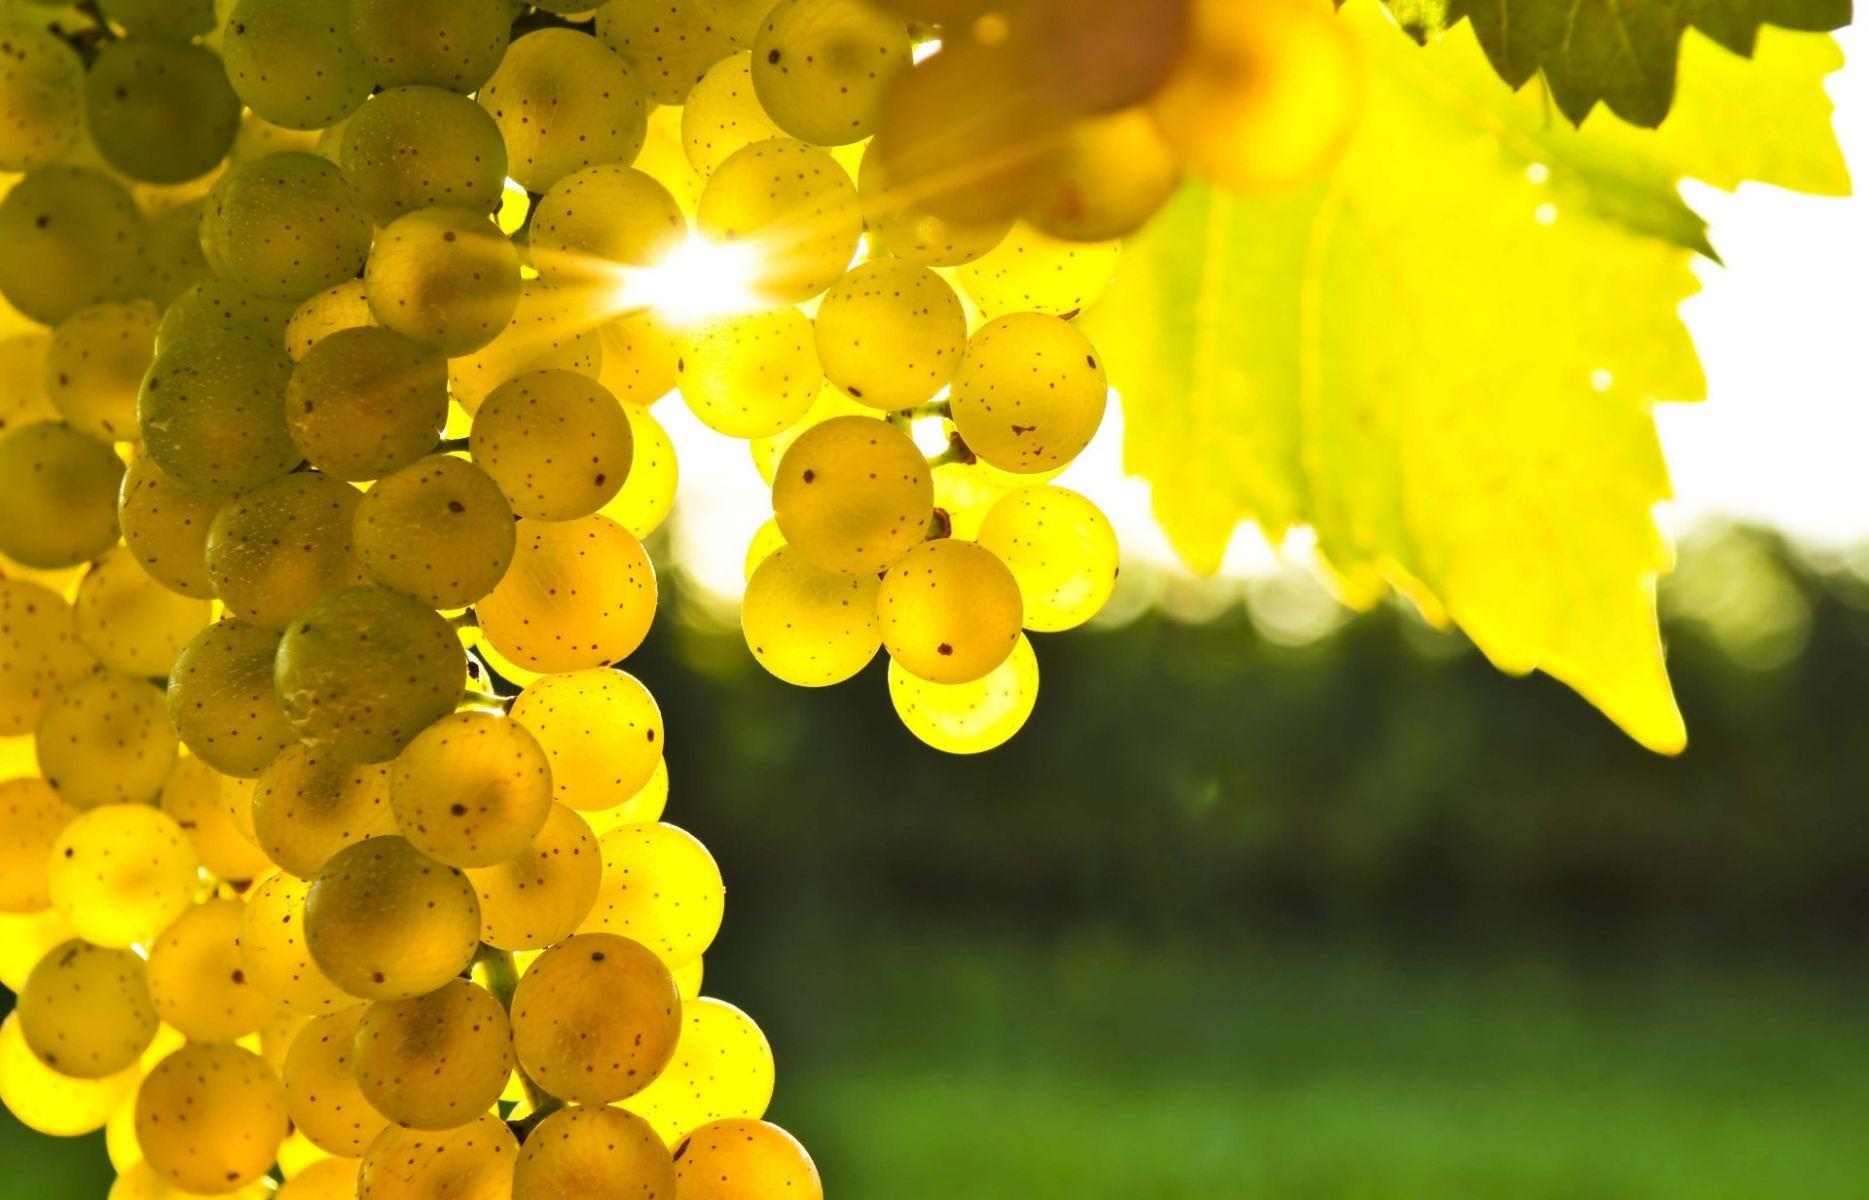 Yellow Grapevine. HD Nature Wallpaper for Mobile and Desktop